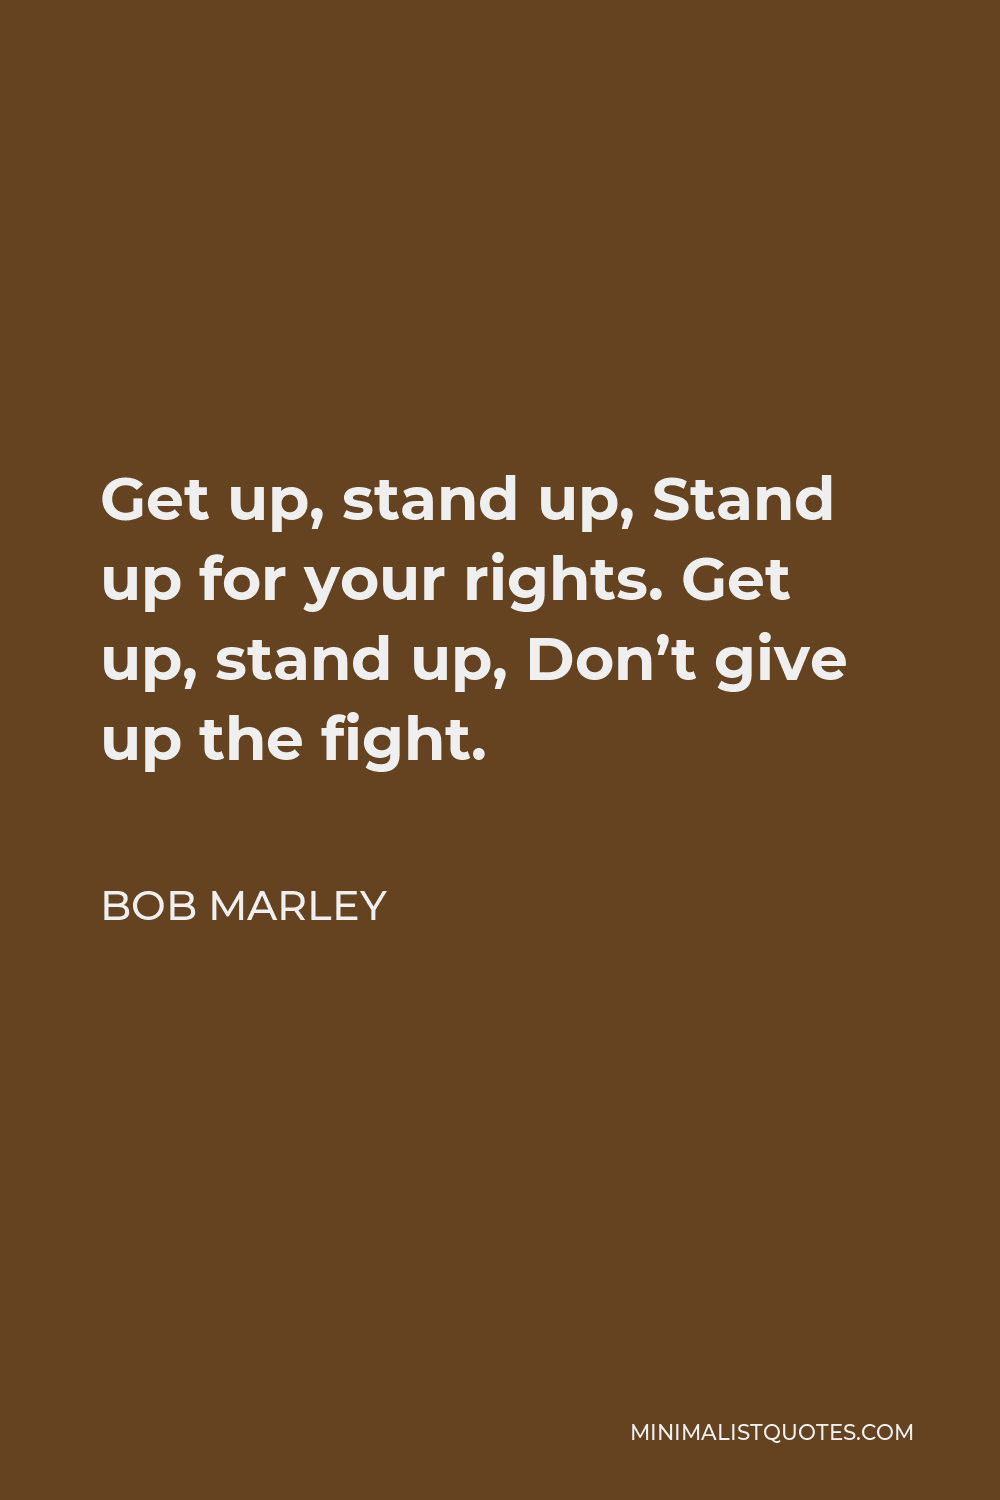 Bob Marley Quote - Get up, stand up, Stand up for your rights. Get up, stand up, Don’t give up the fight.